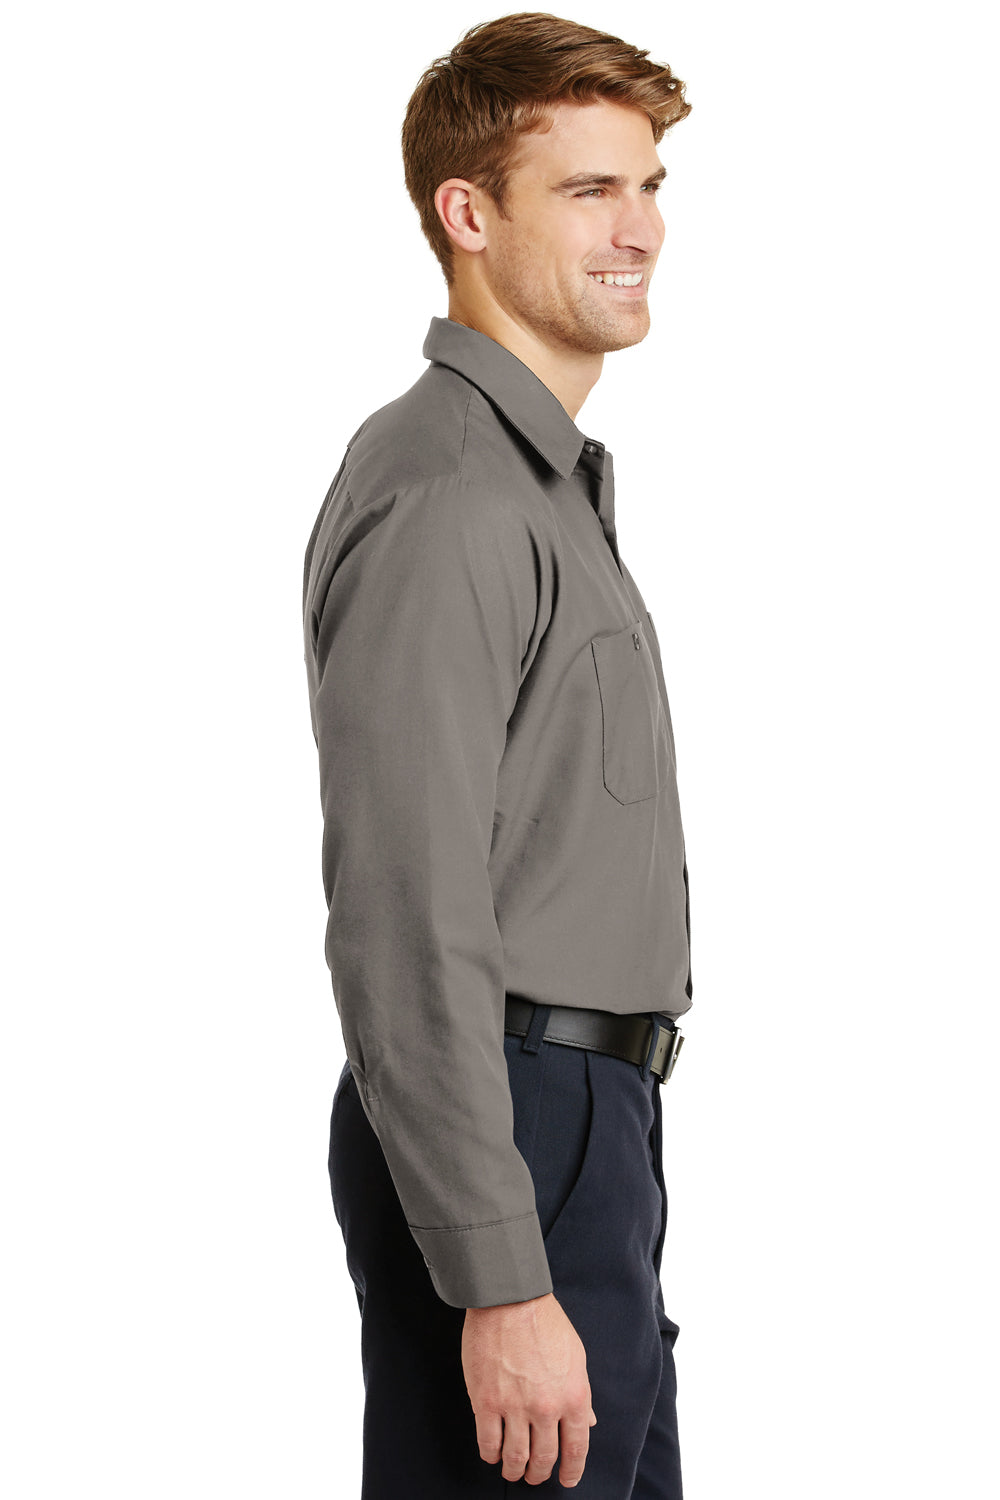 Red Kap SP14 Mens Industrial Moisture Wicking Long Sleeve Button Down Shirt w/ Double Pockets Grey Side